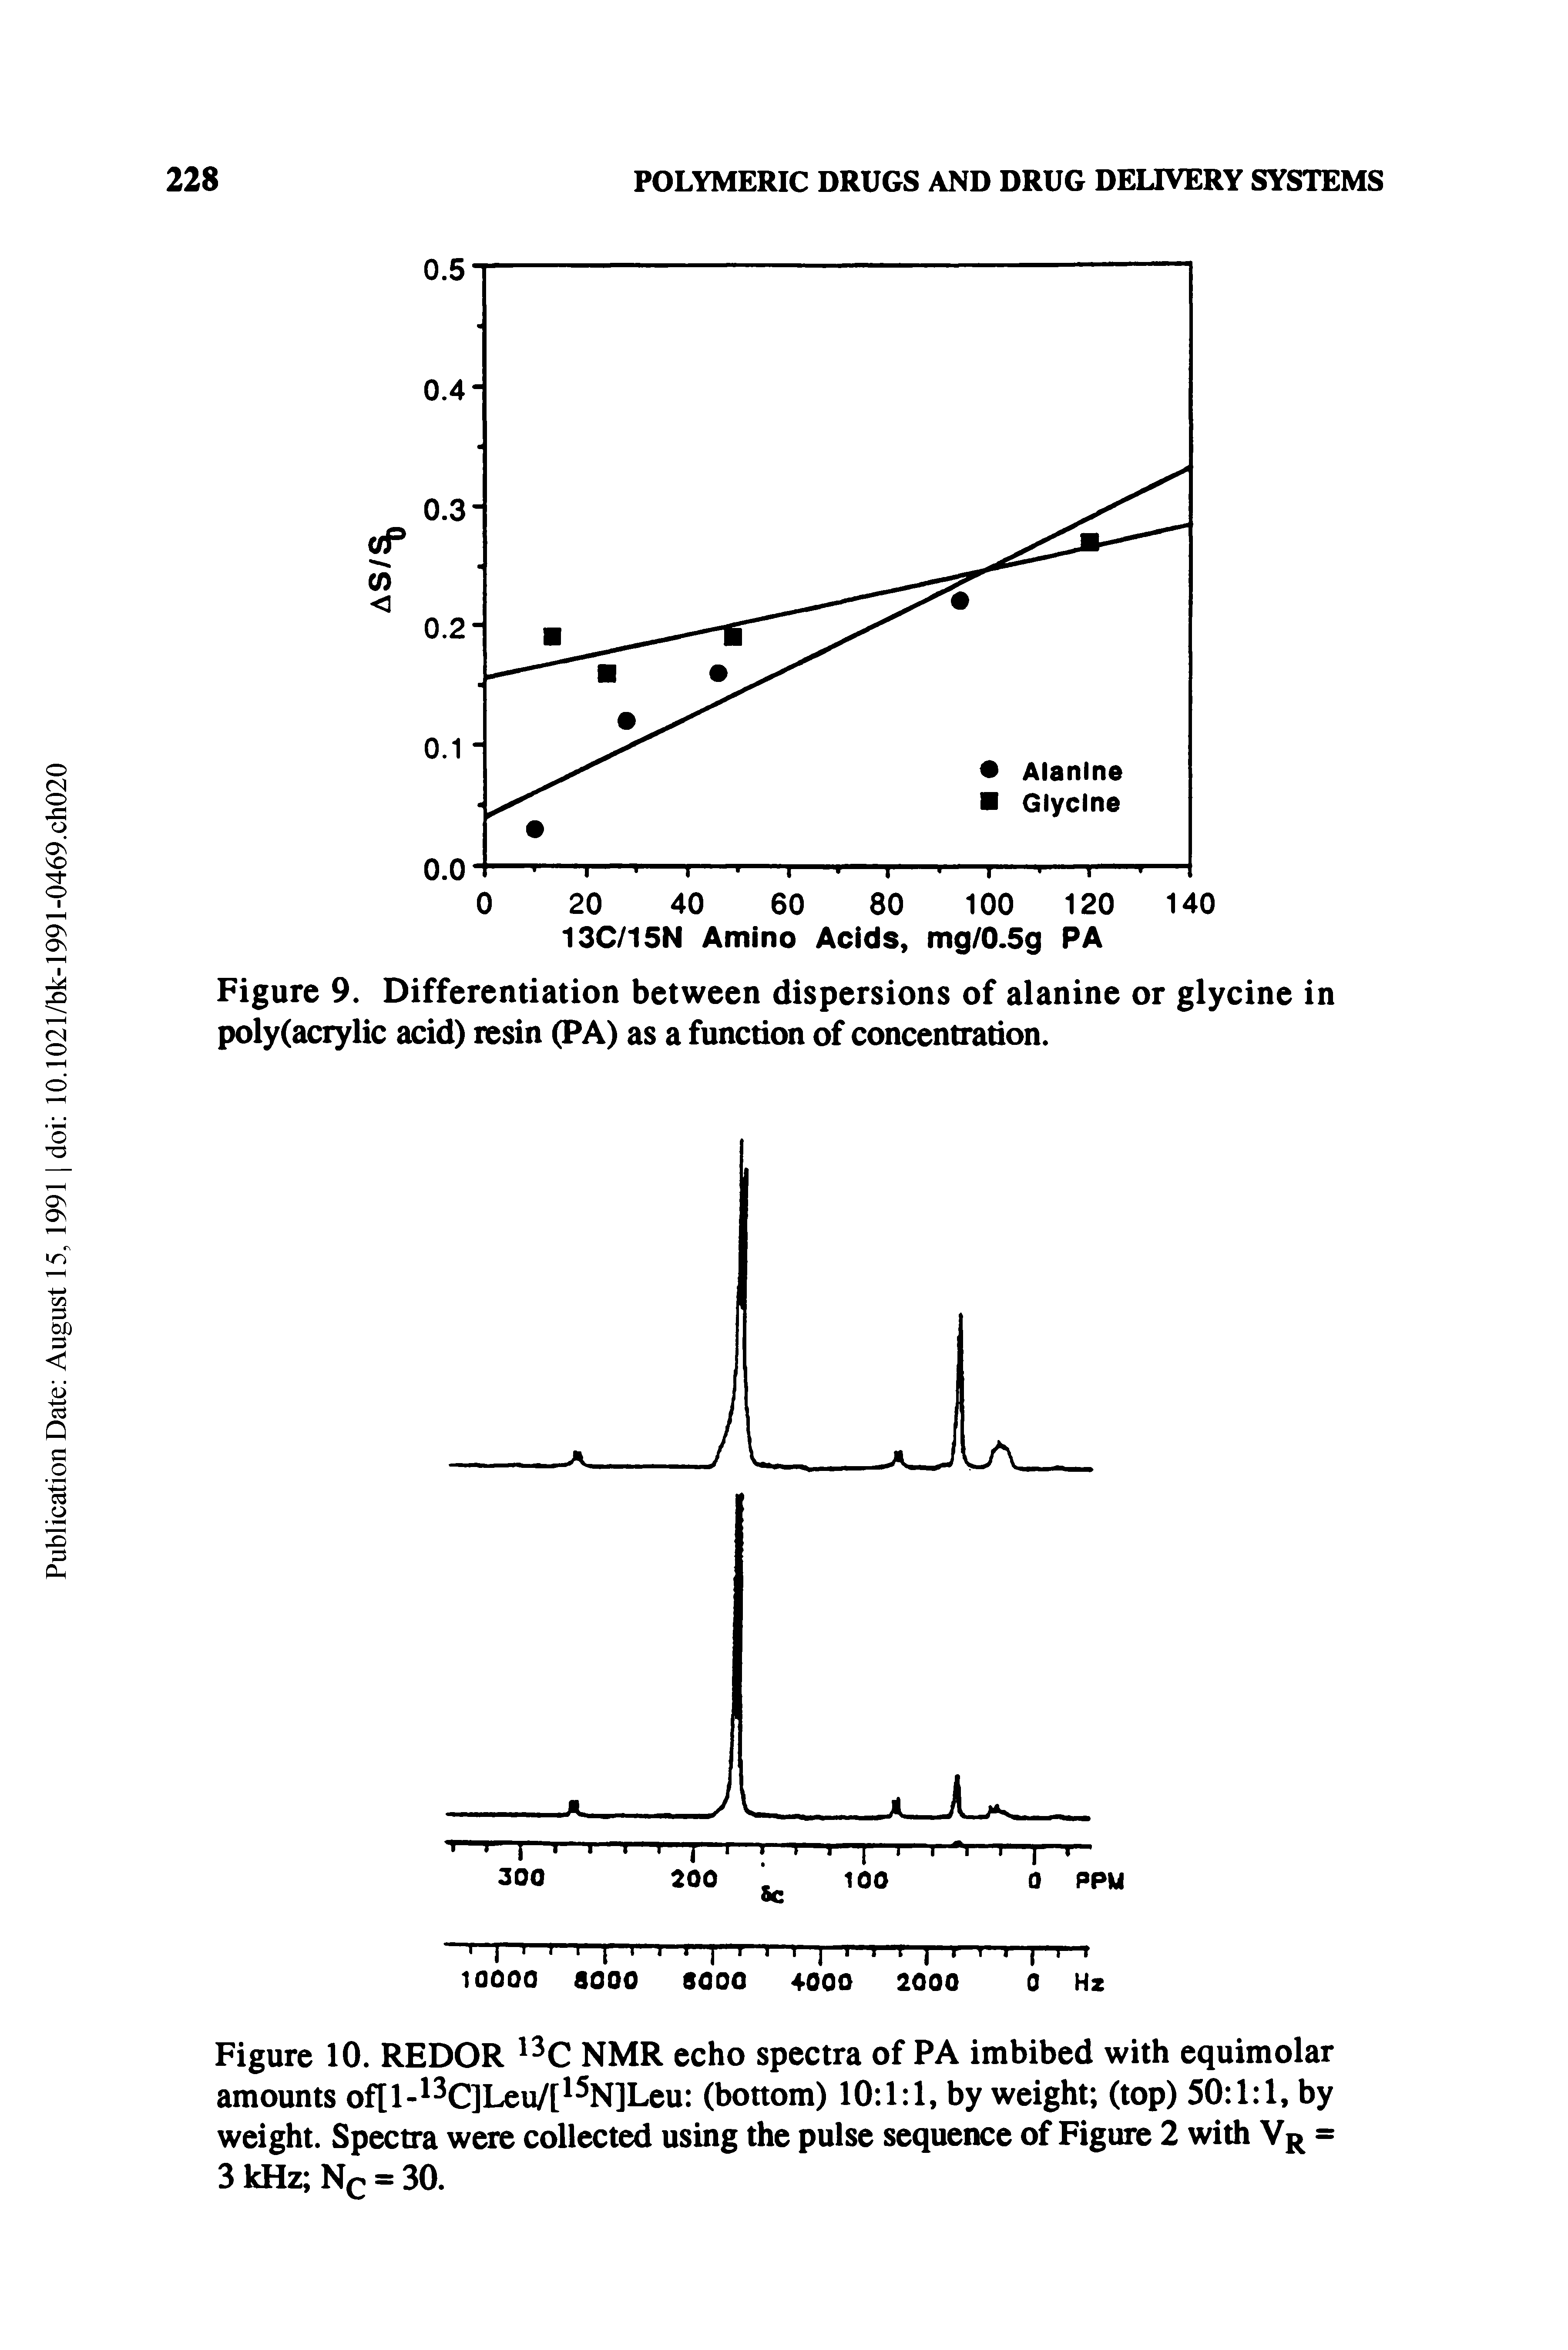 Figure 10. REDOR 13C NMR echo spectra of PA imbibed with equimolar amounts of[l-13C]Leu/[15N]Leu (bottom) 10 1 1, by weight (top) 50 1 1, by weight. Spectra were collected using the pulse sequence of Figure 2 with VR = 3 kHz Nc = 30.